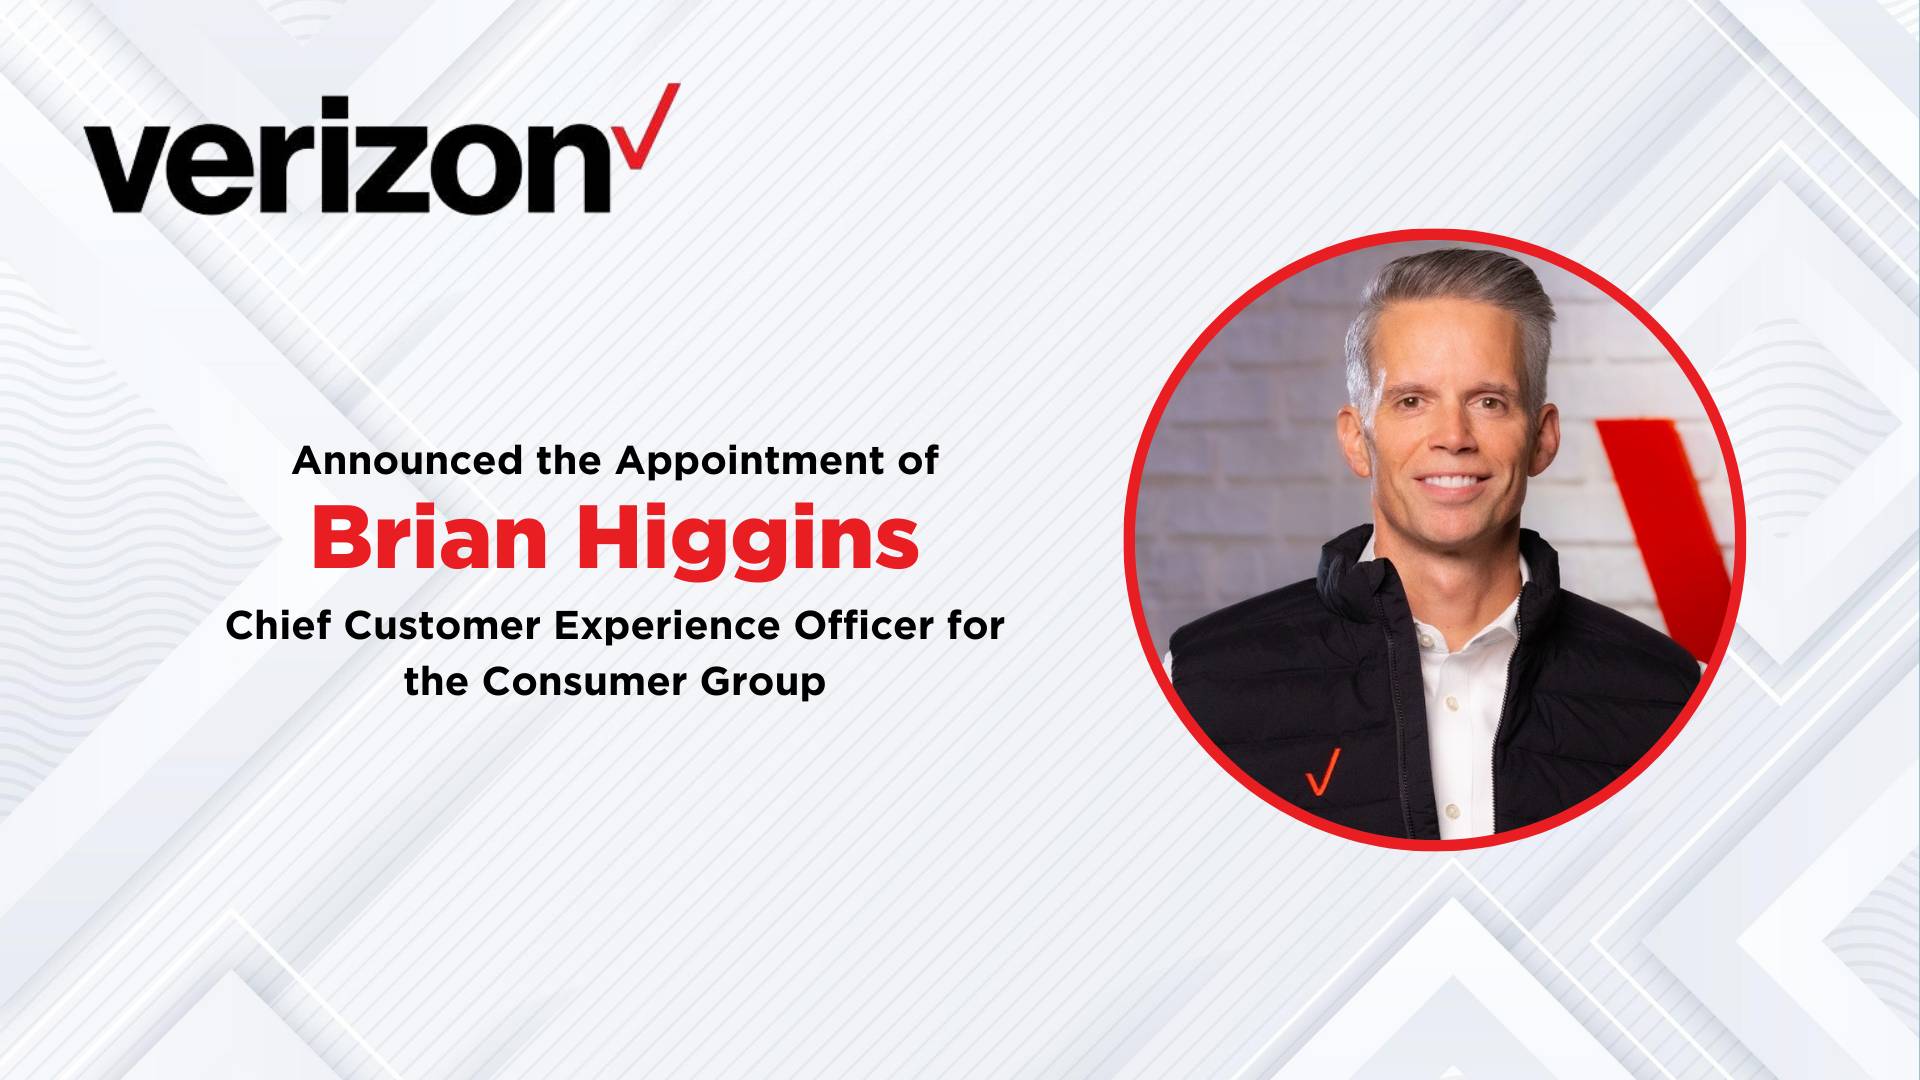 Verizon invests in customer experience; names first-ever Chief Experience Officer